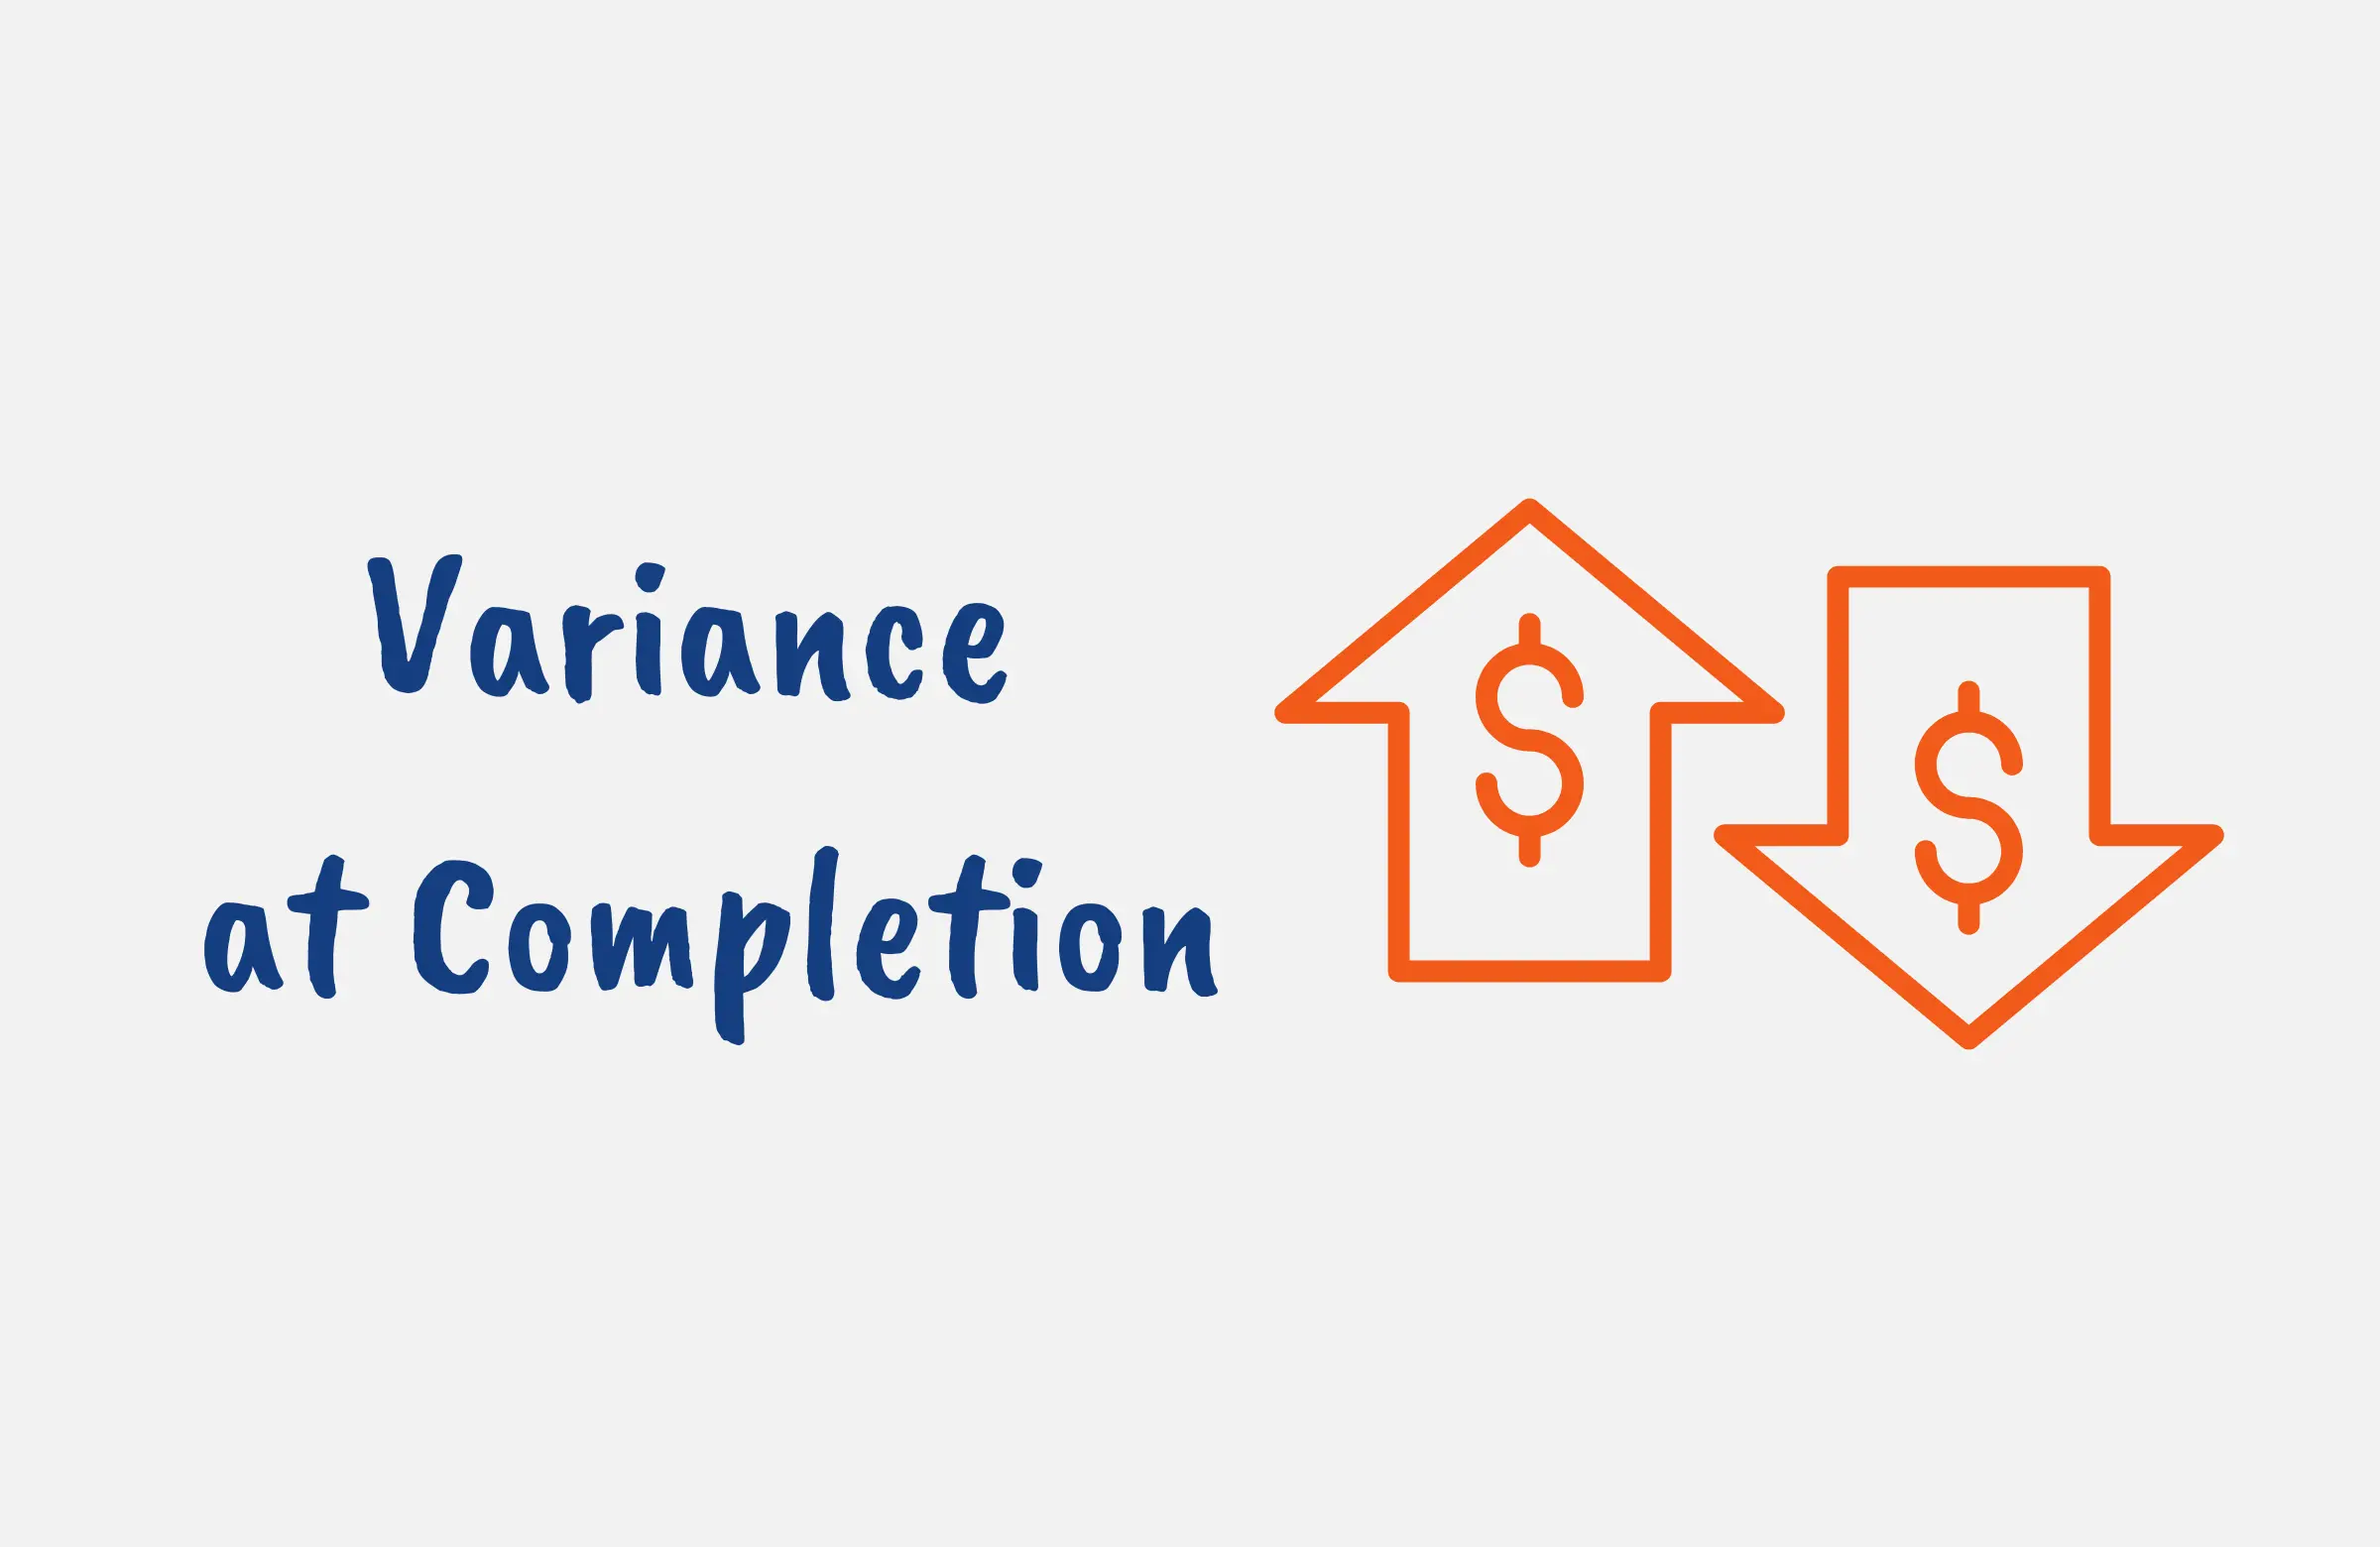 Variance at Completion